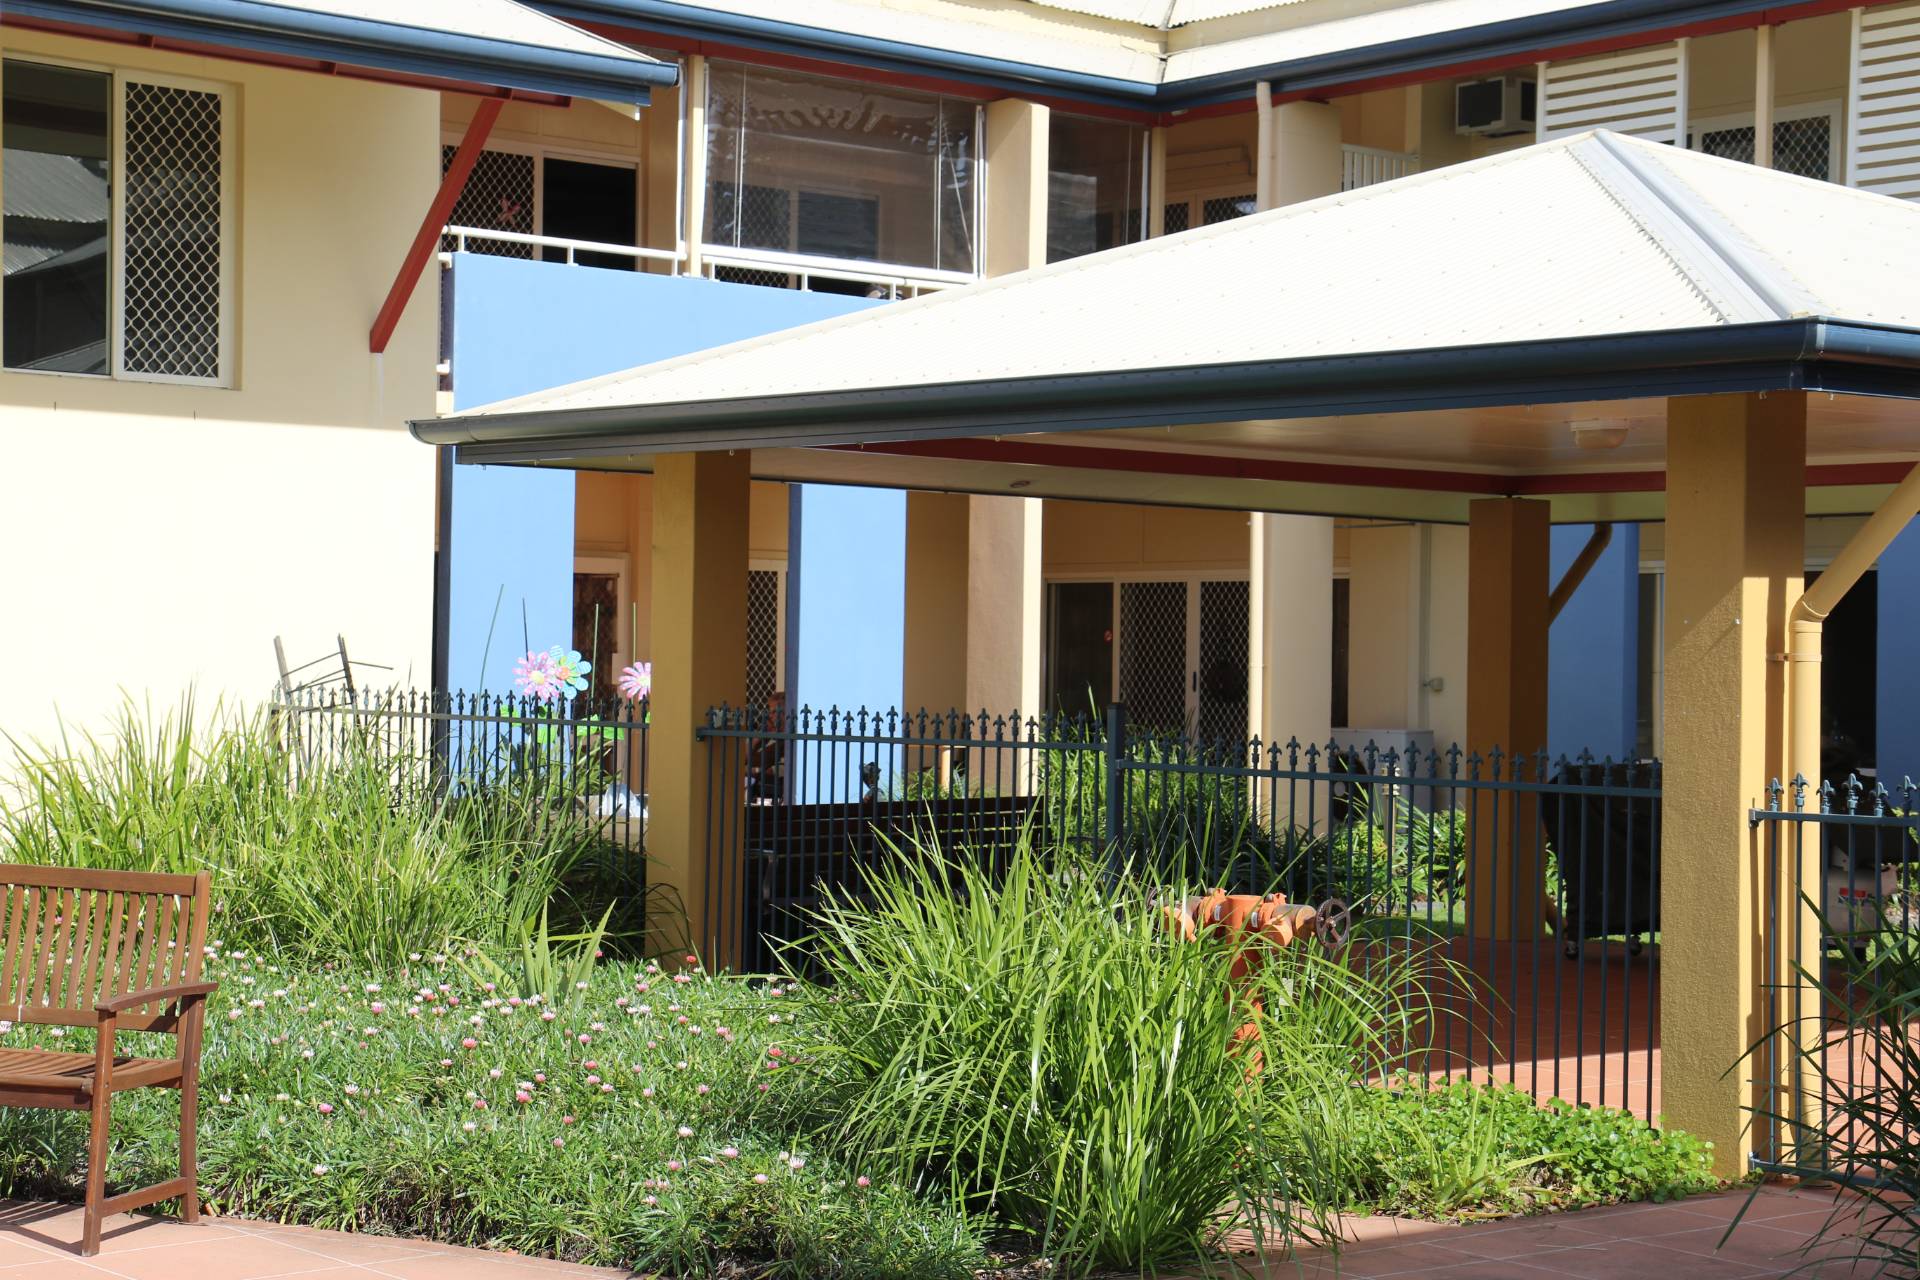 Aged Care Facility Gold Coast Queensland - Keith Turnbull Place